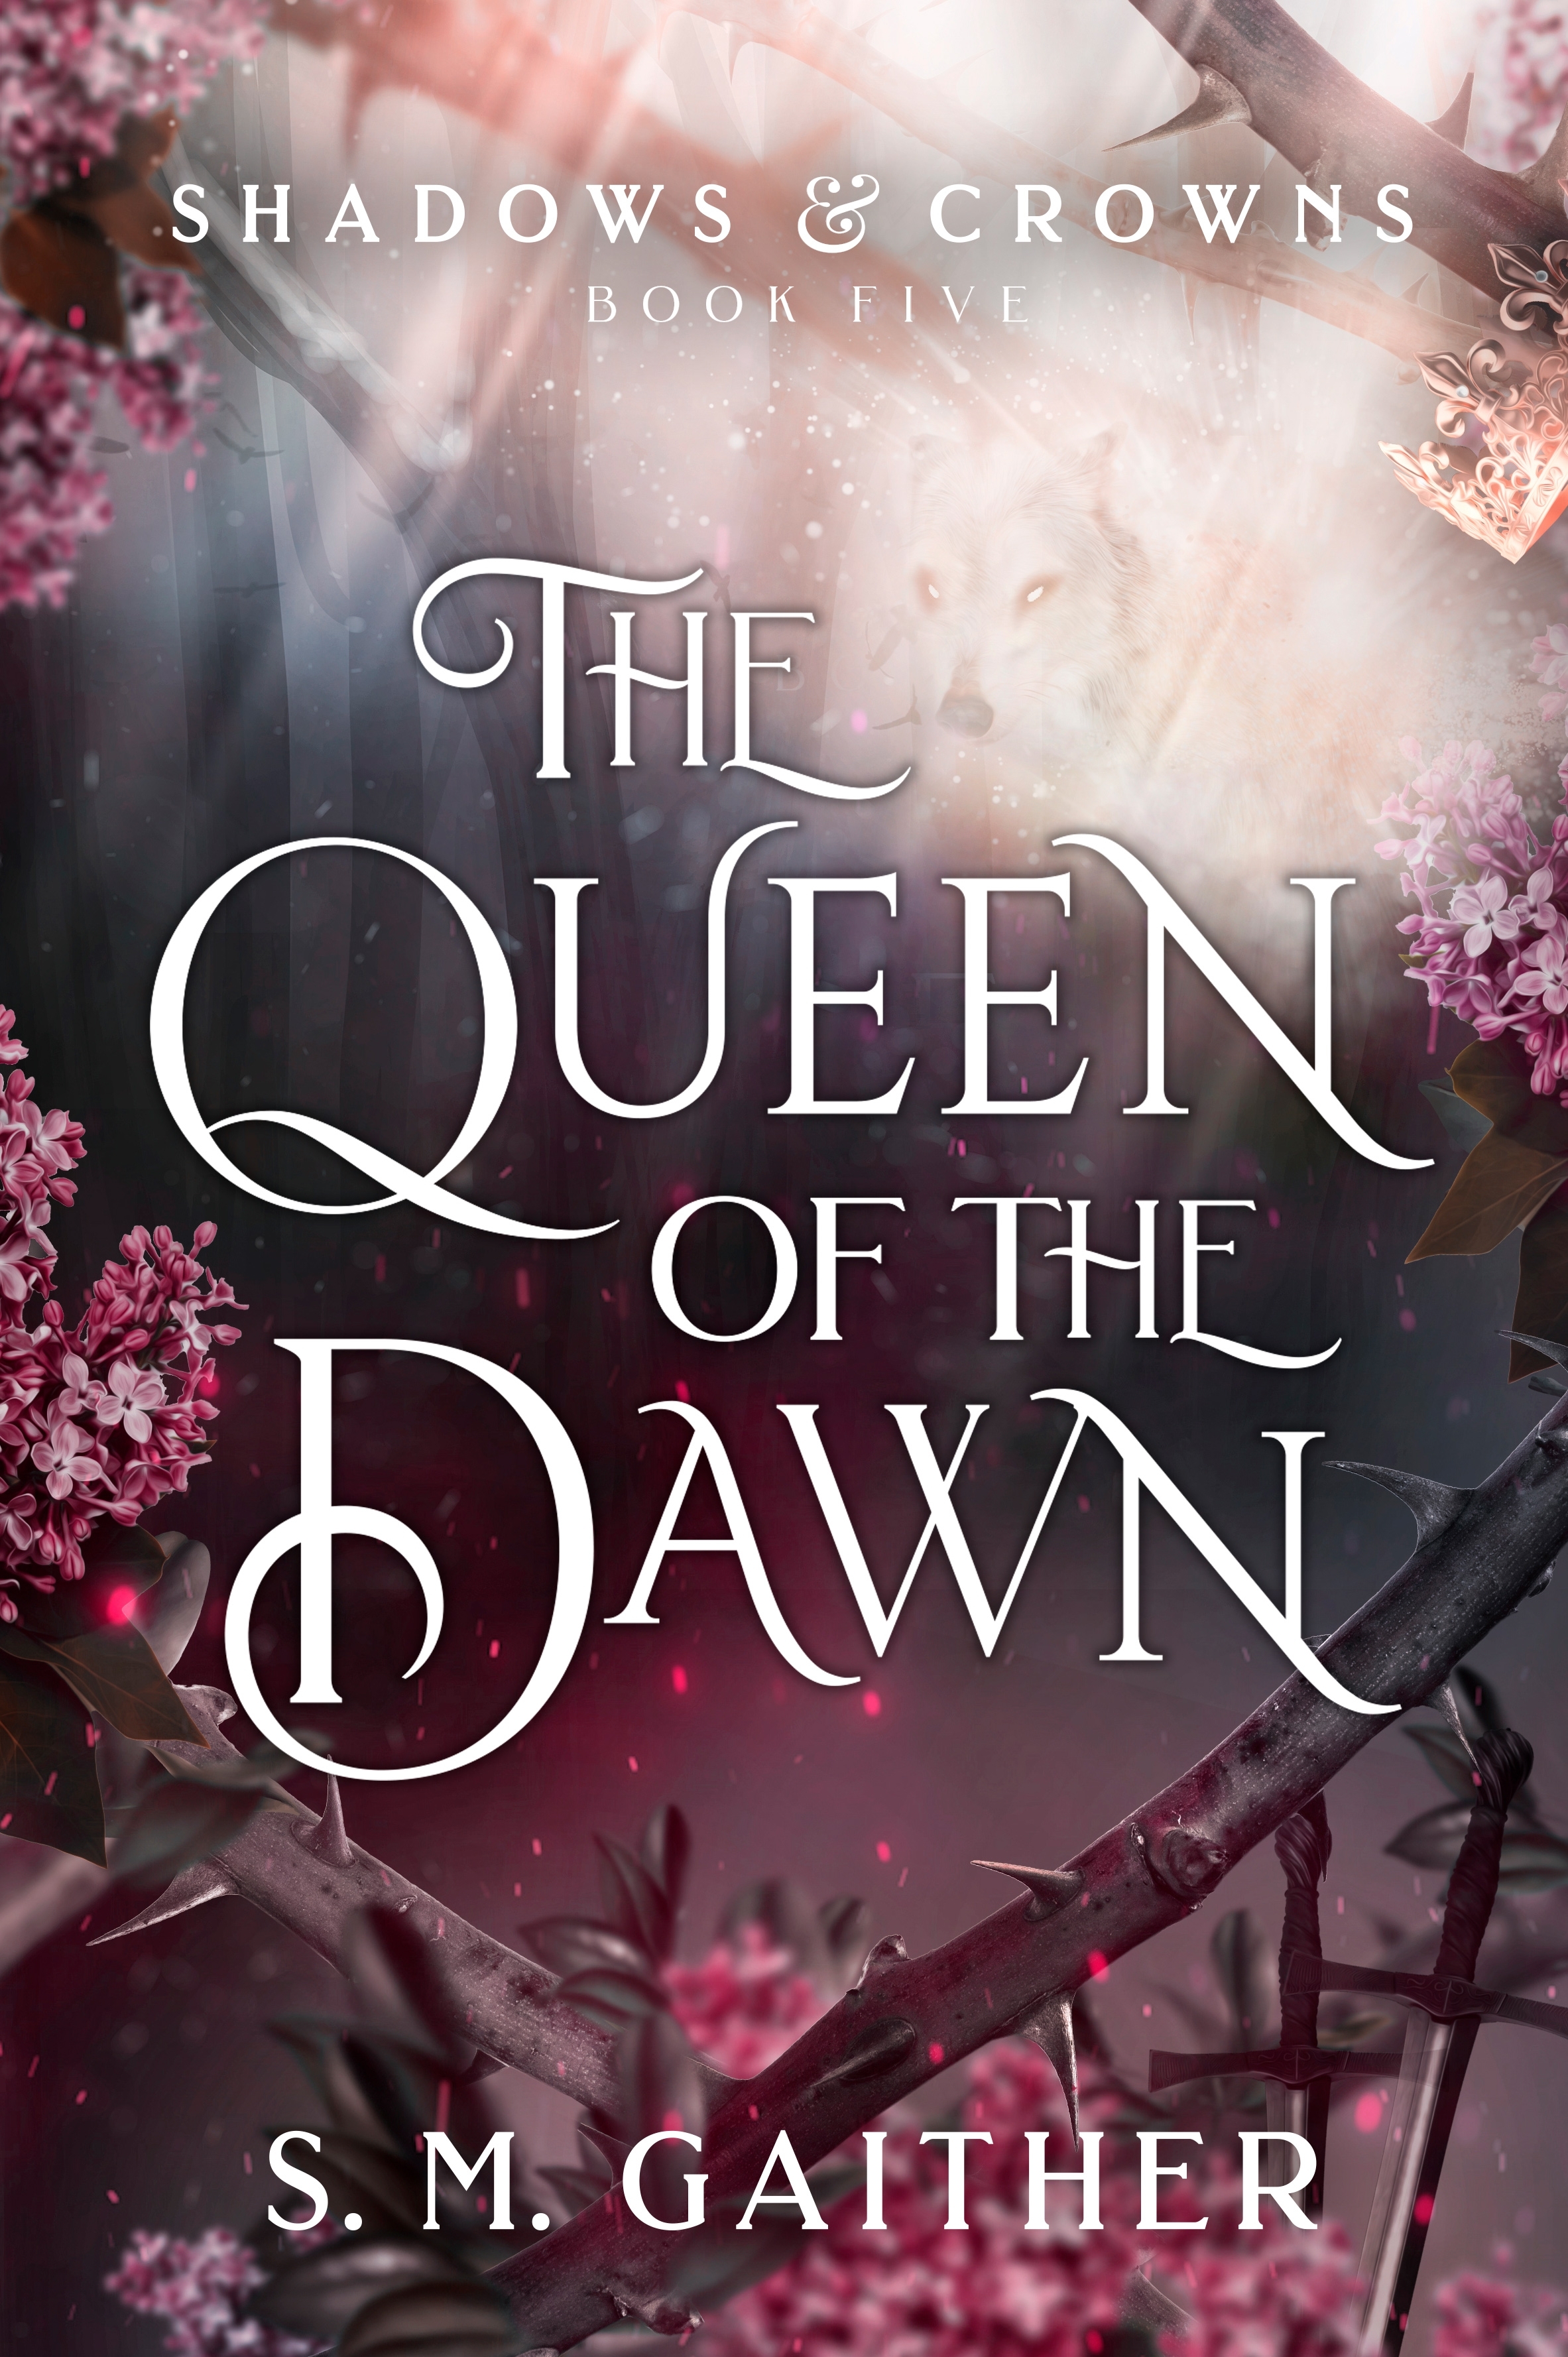 The Queen of the Dawn (Shadows & Crowns Book 5)